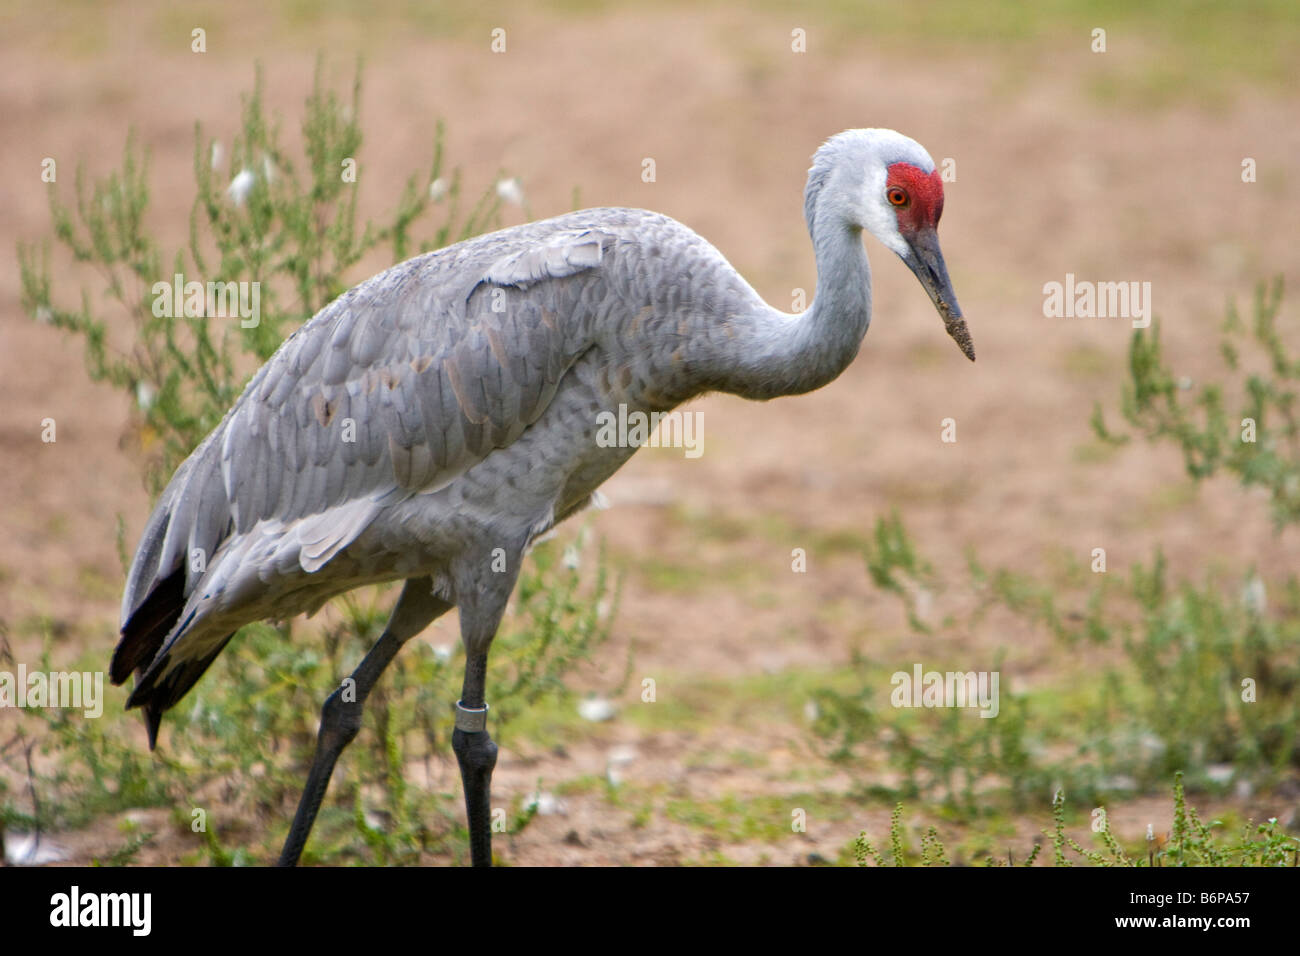 A Sandhill Crane forages for food September 23 2008 Stock Photo